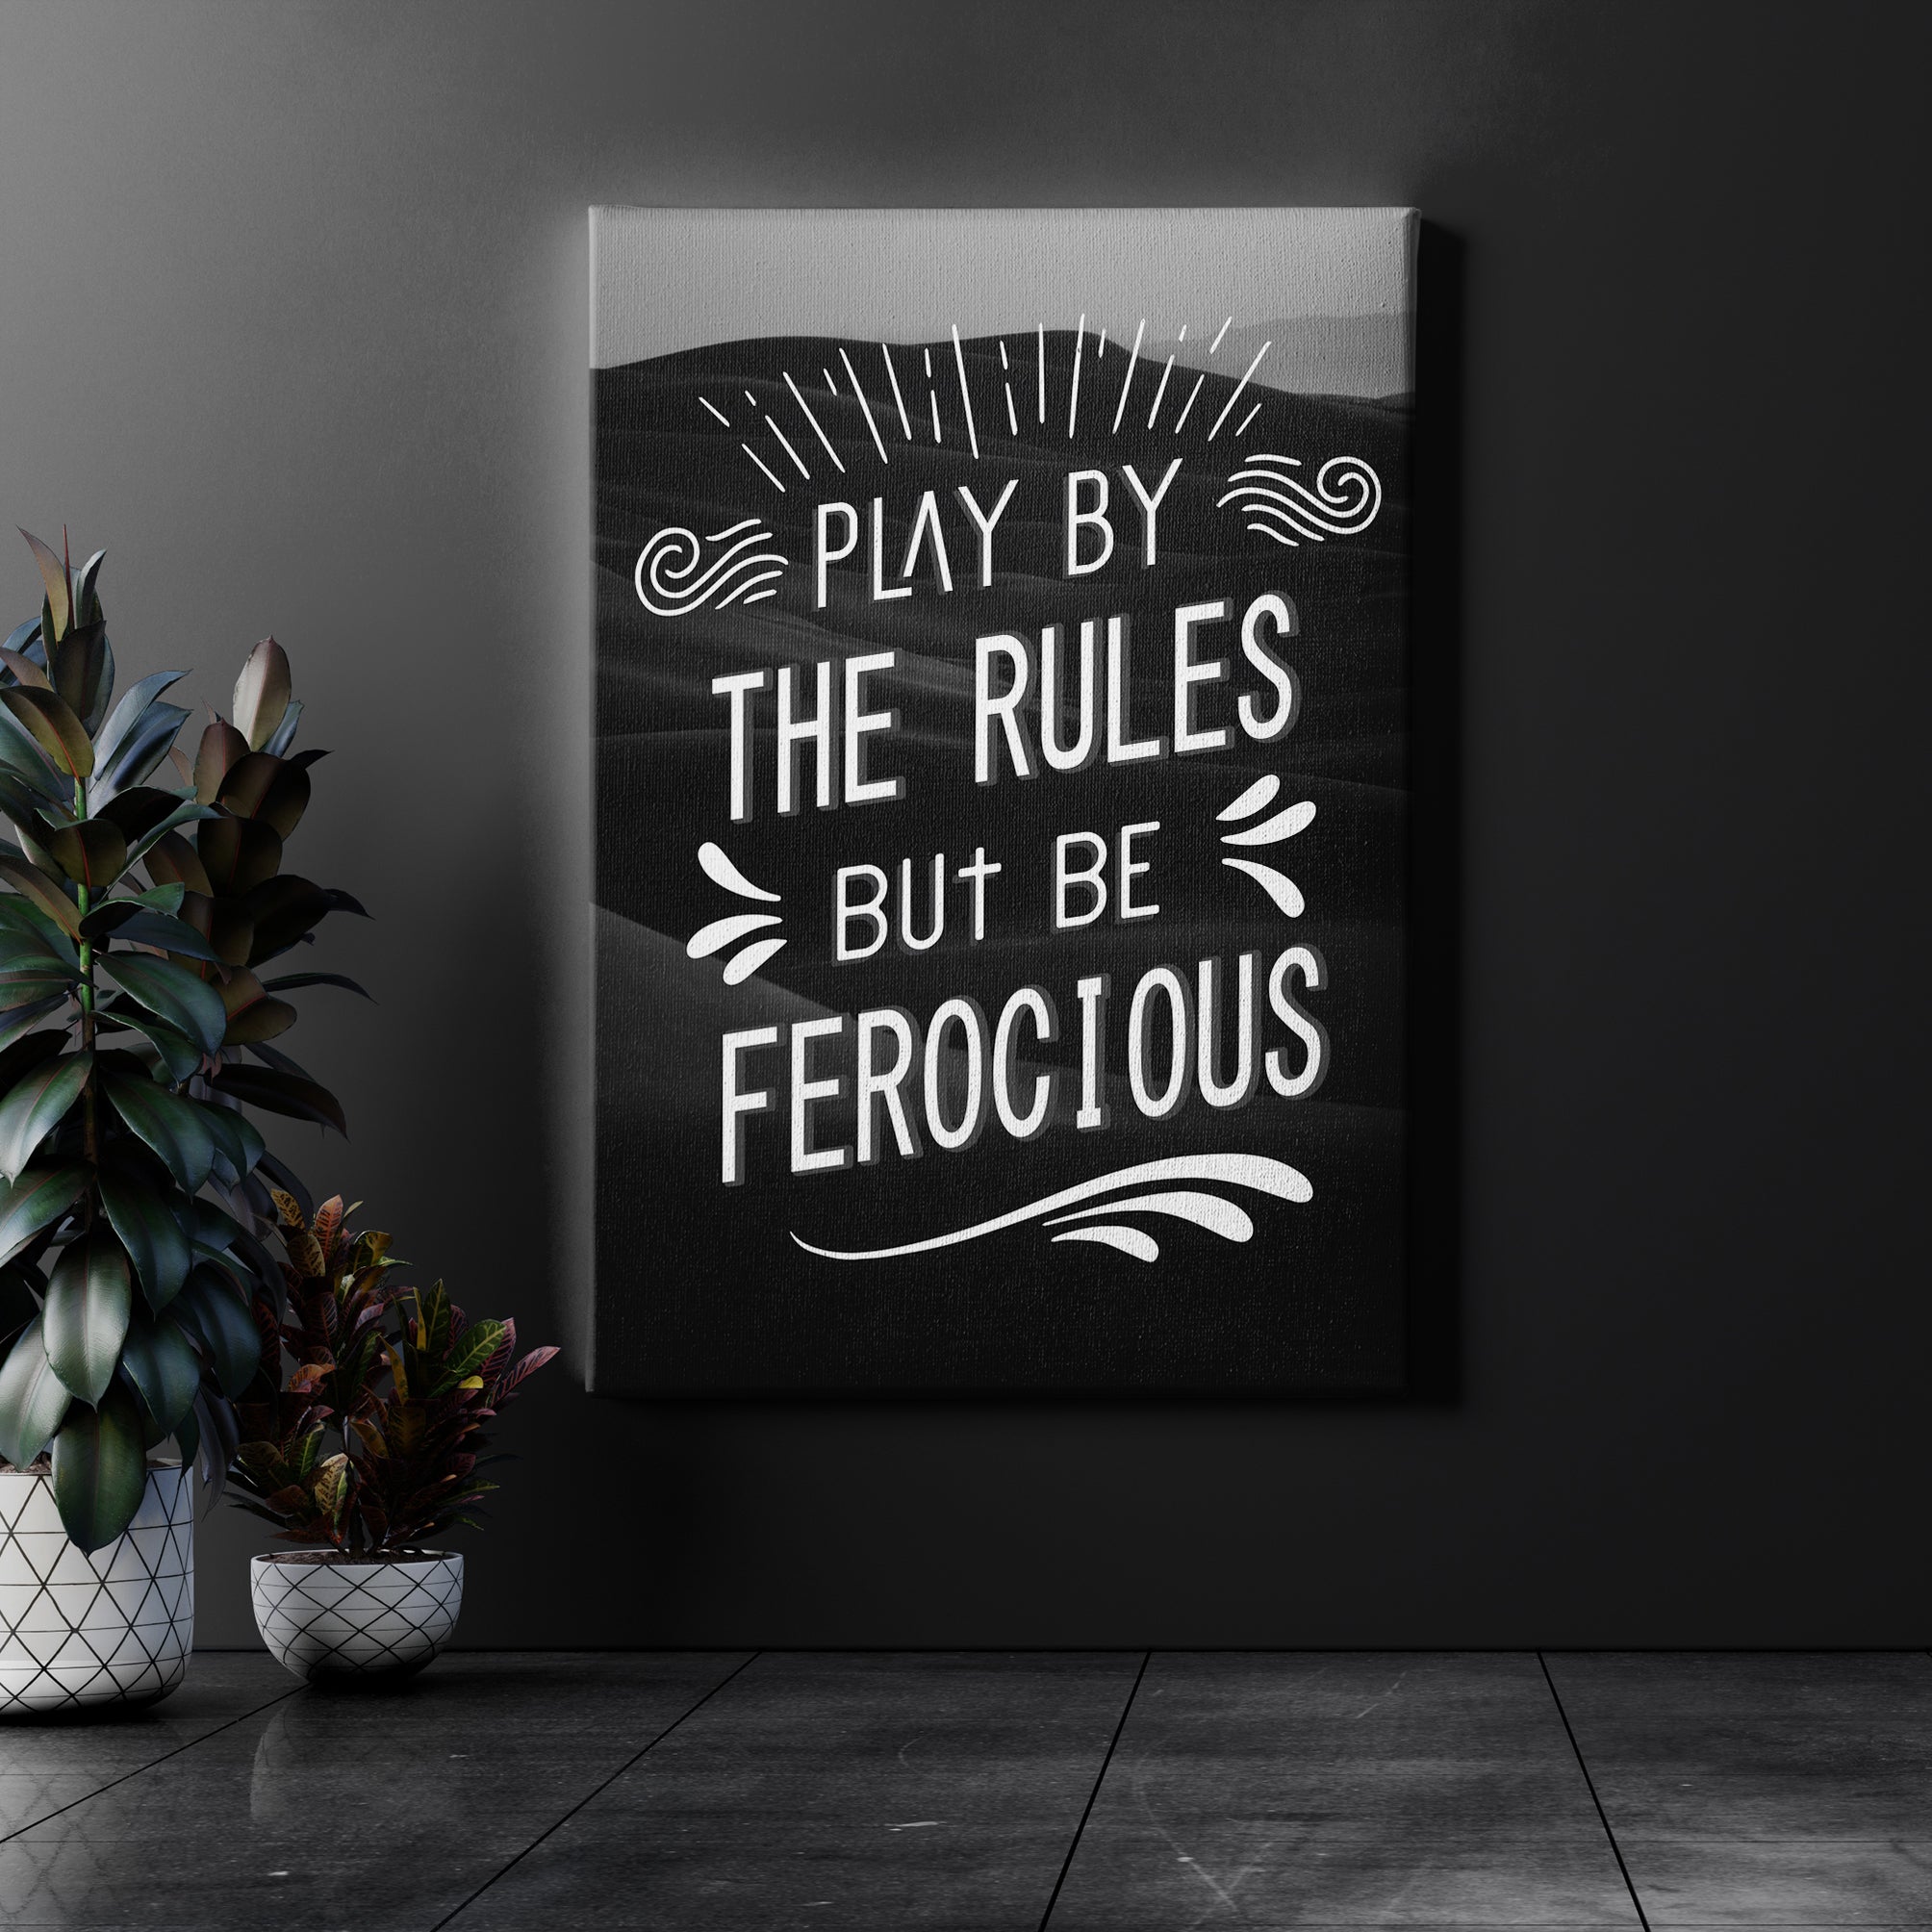 Play by the rules but be ferocious